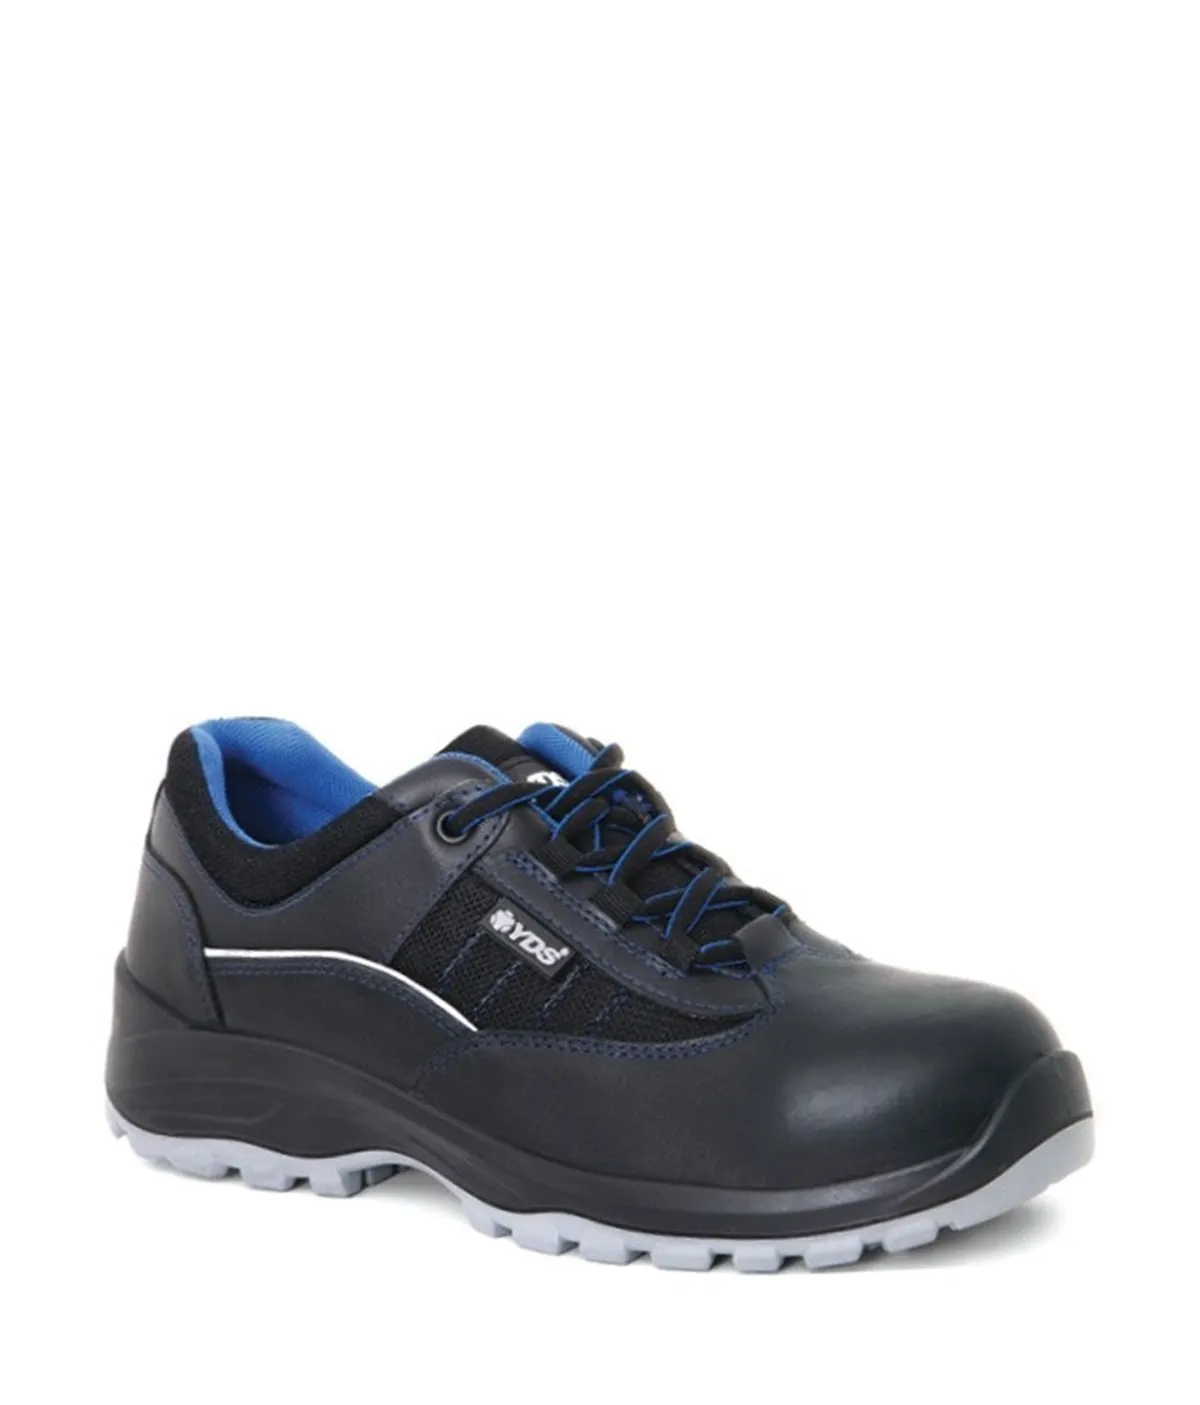 safety-shoes-work-shoes-work-shoe-safety-shoes-src-non-slip-shoes-resistant-shoes-steel-toe-safety-wear